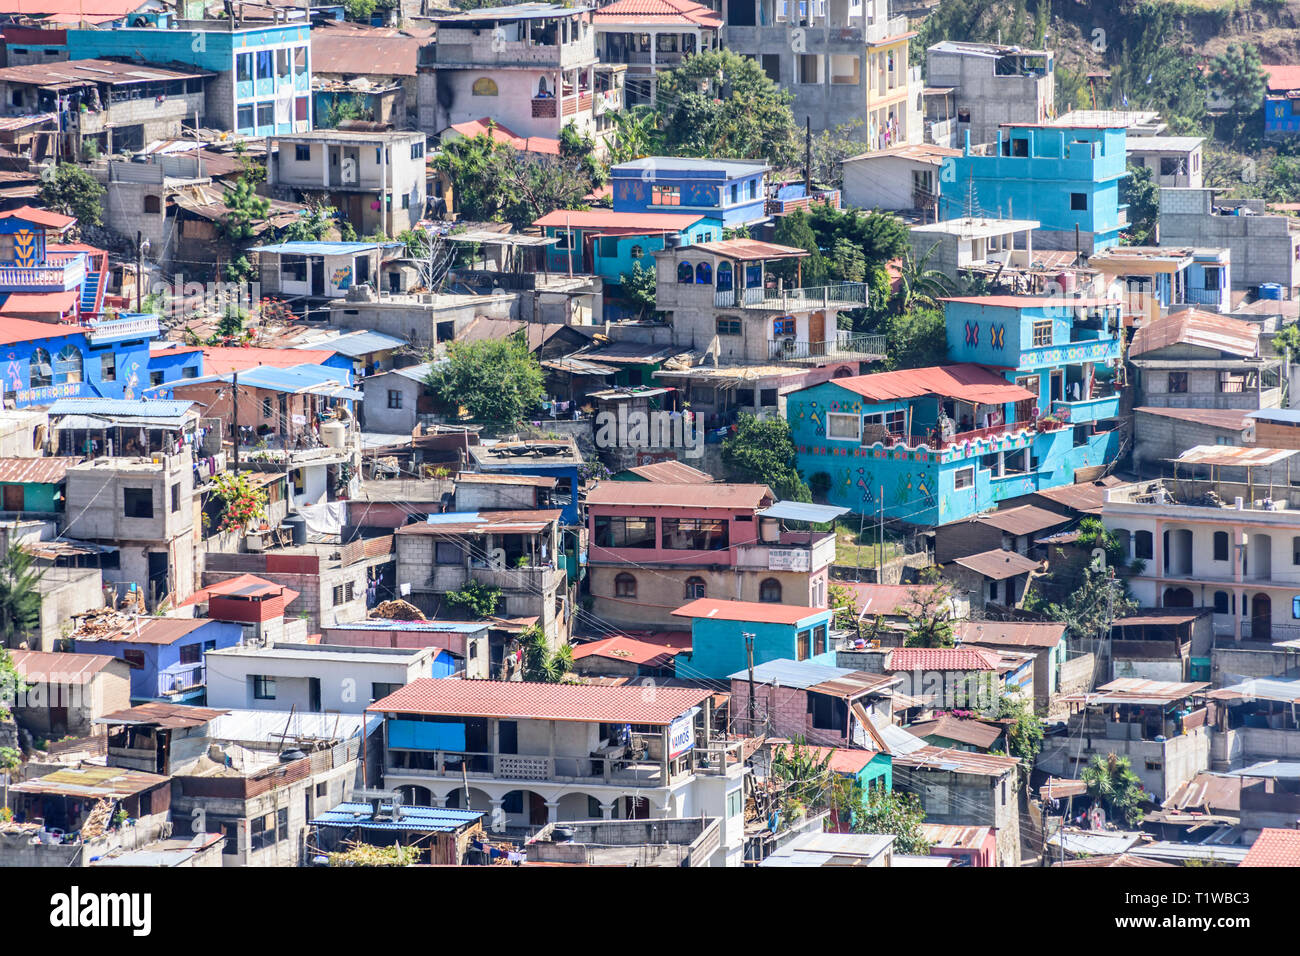 Santa Catarina Palopo, Lake Atitlan, Guatemala - December 29, 2018: Painting project in lakeside town paints houses with traditional clothing designs. Stock Photo